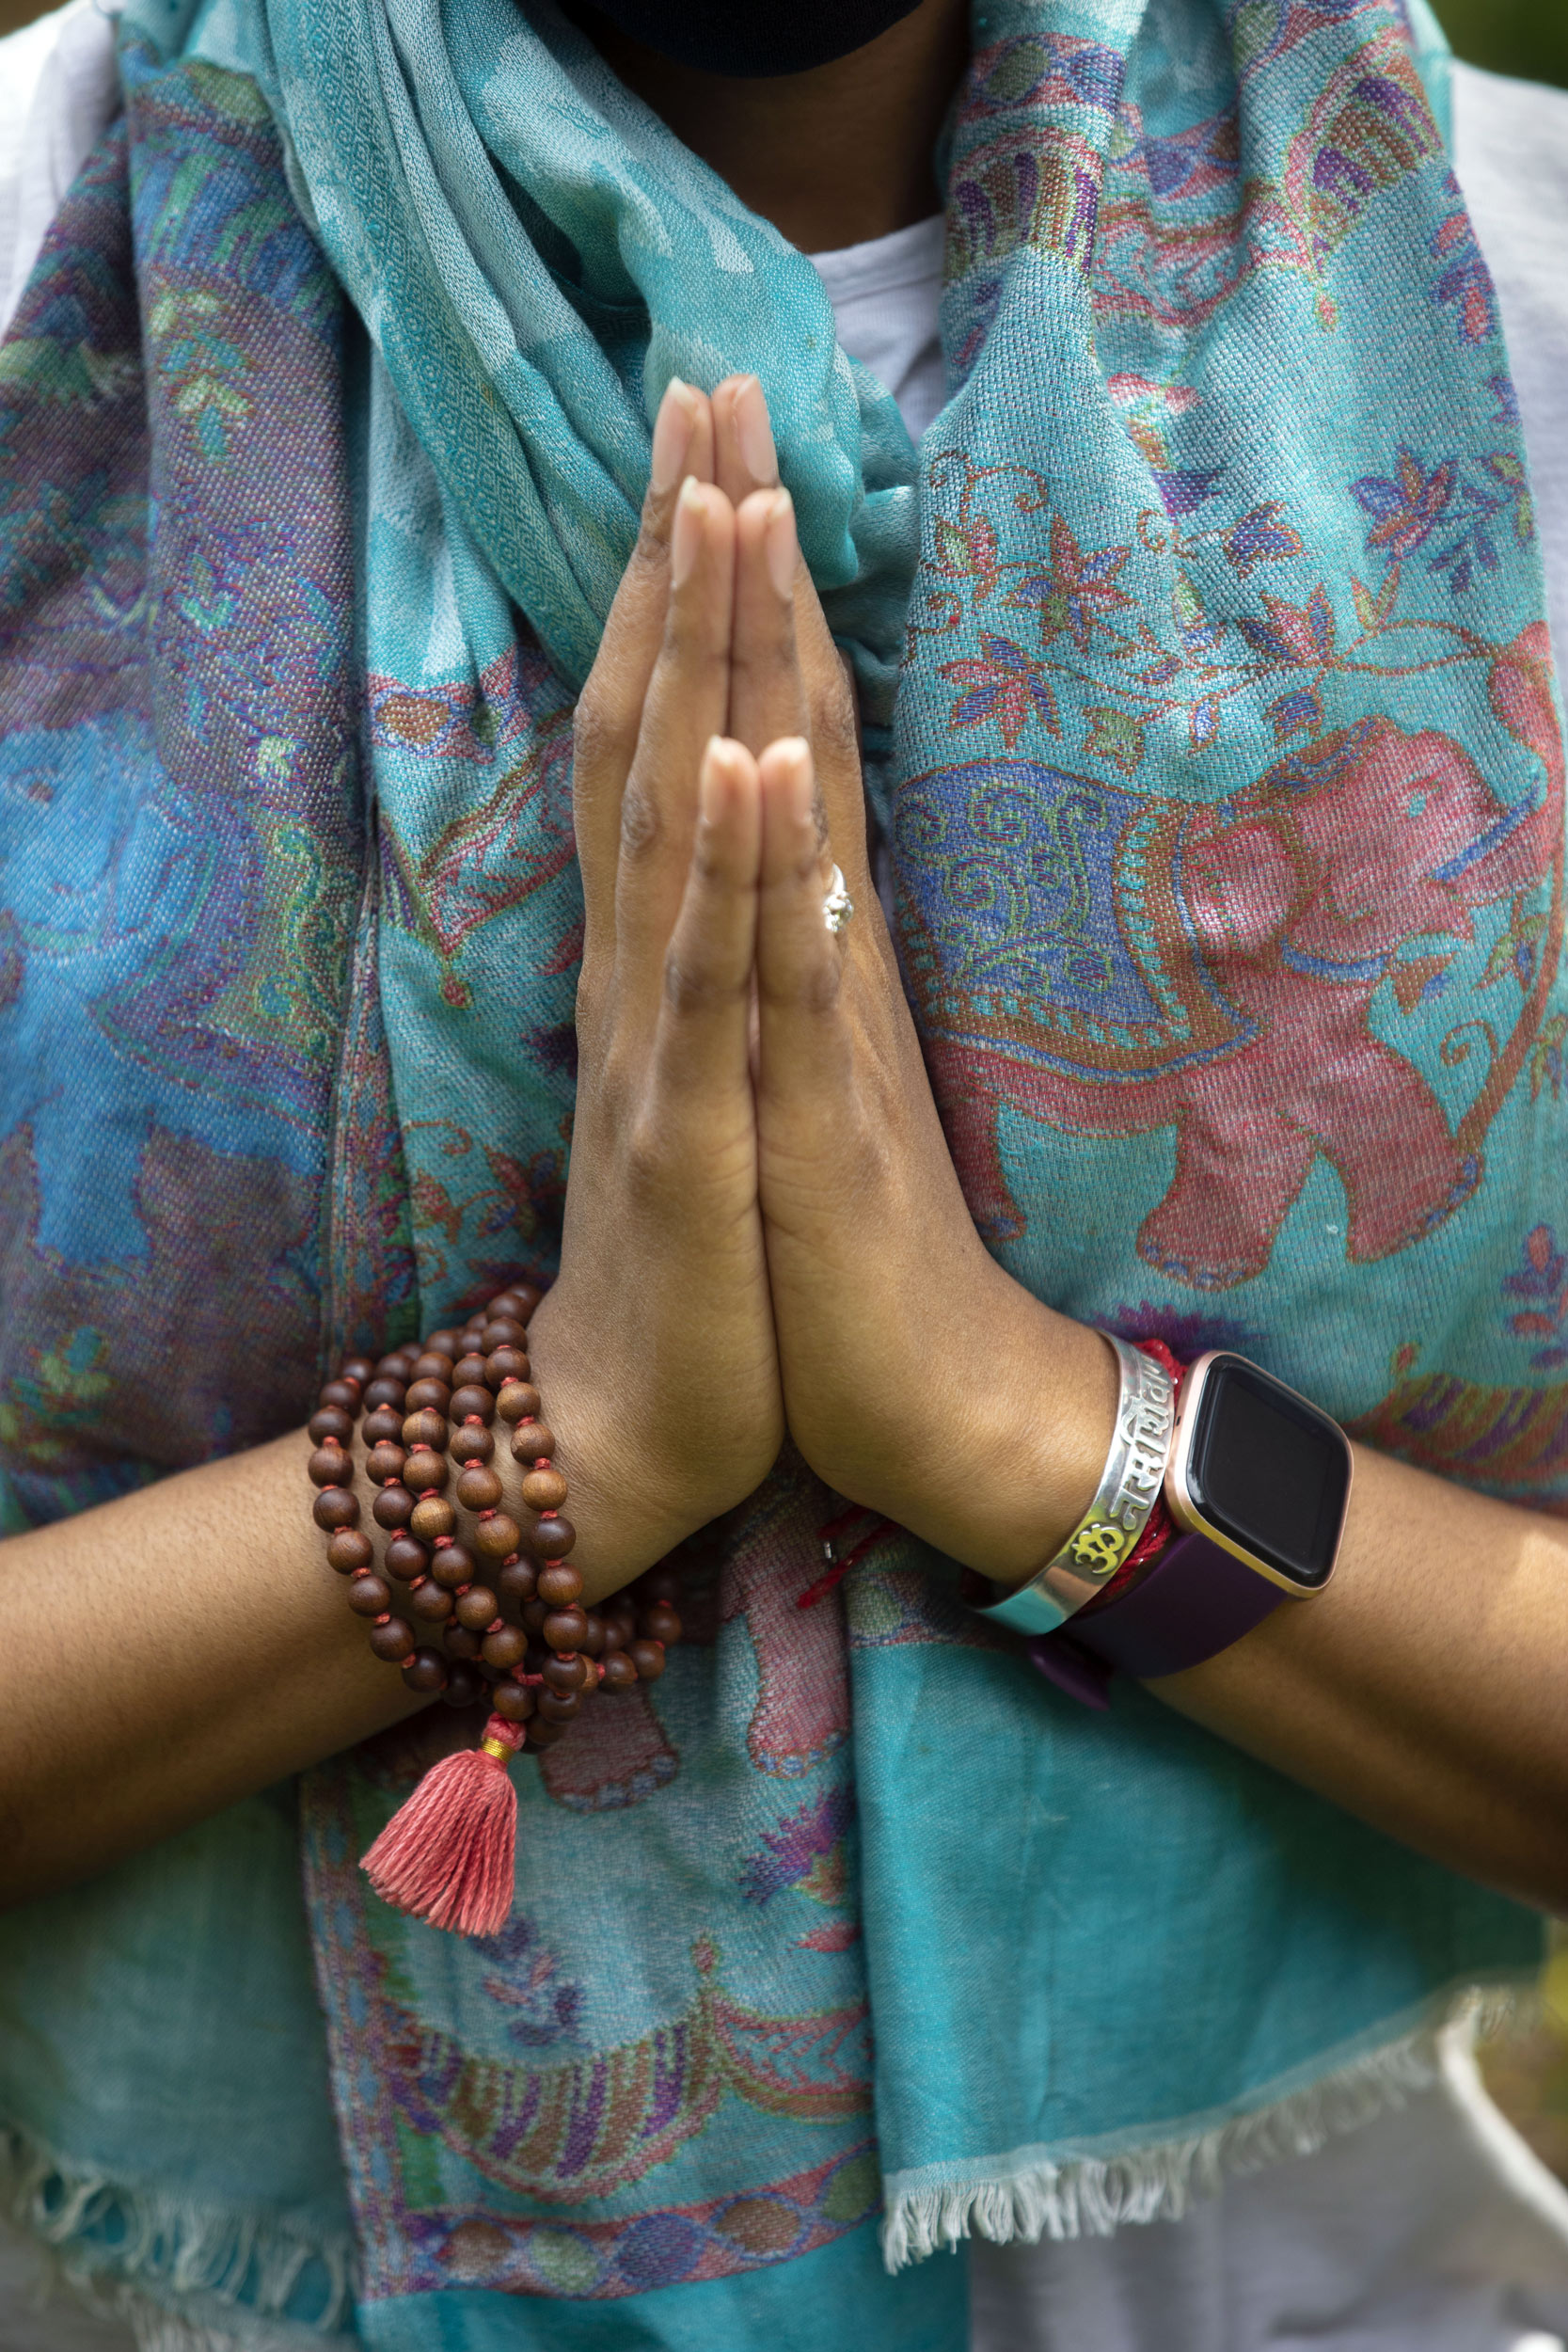 Jessica Chang practices yoga, holding her hands in a prayer.